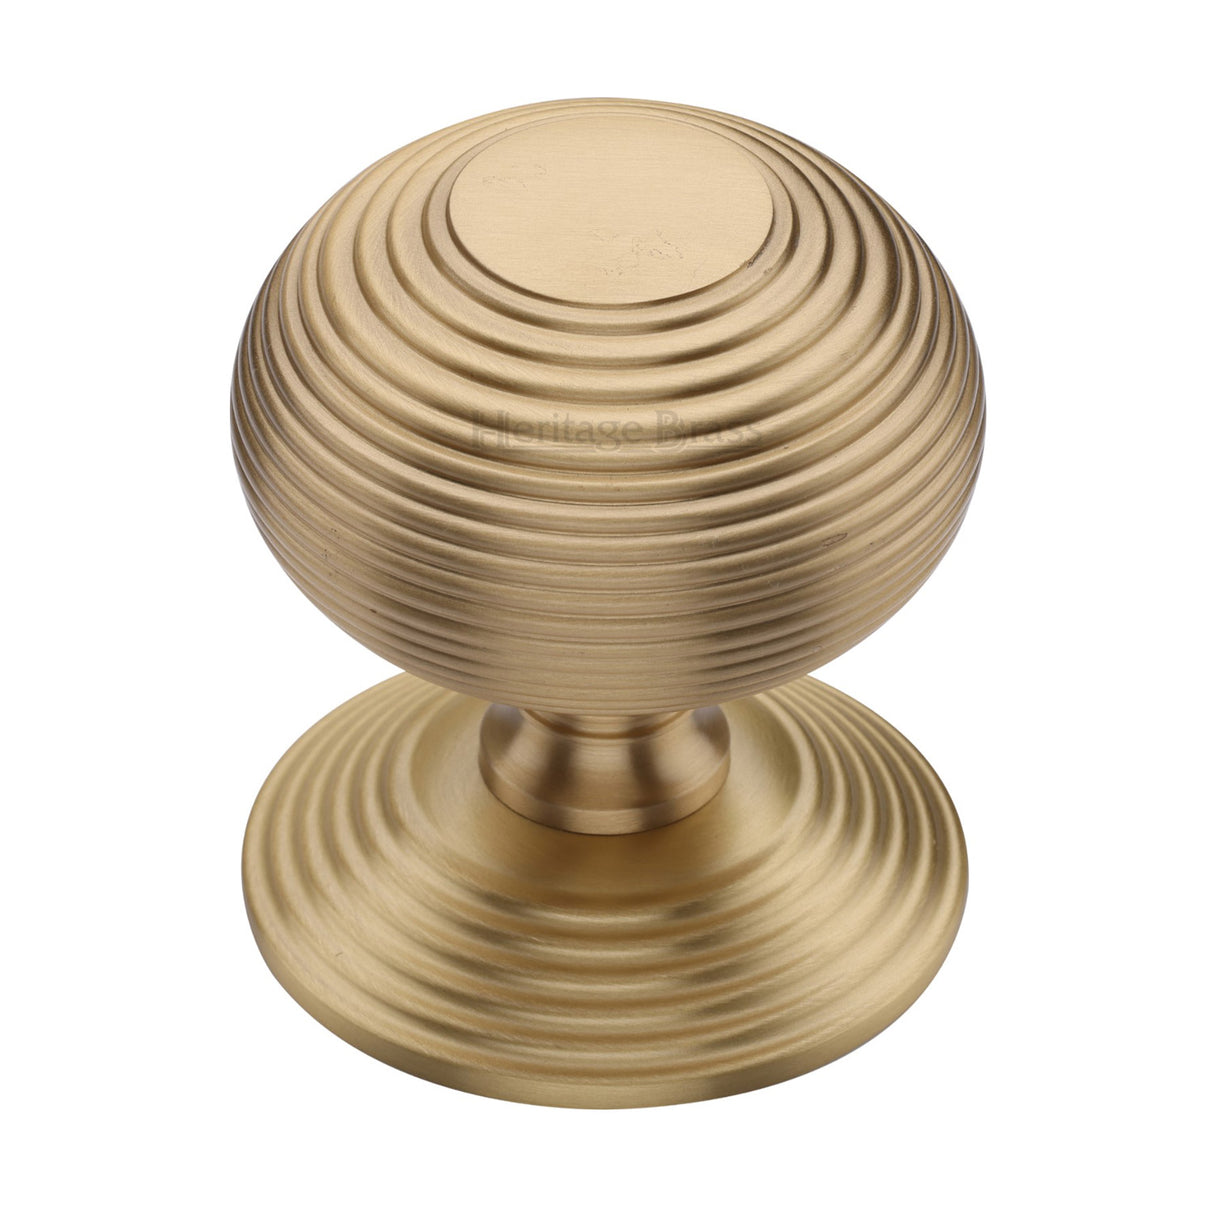 This is an image of a Heritage Brass - Centre Door Knob Reeded Design 3 1/2 Satin Brass Finish, rr906-sb that is available to order from Trade Door Handles in Kendal.